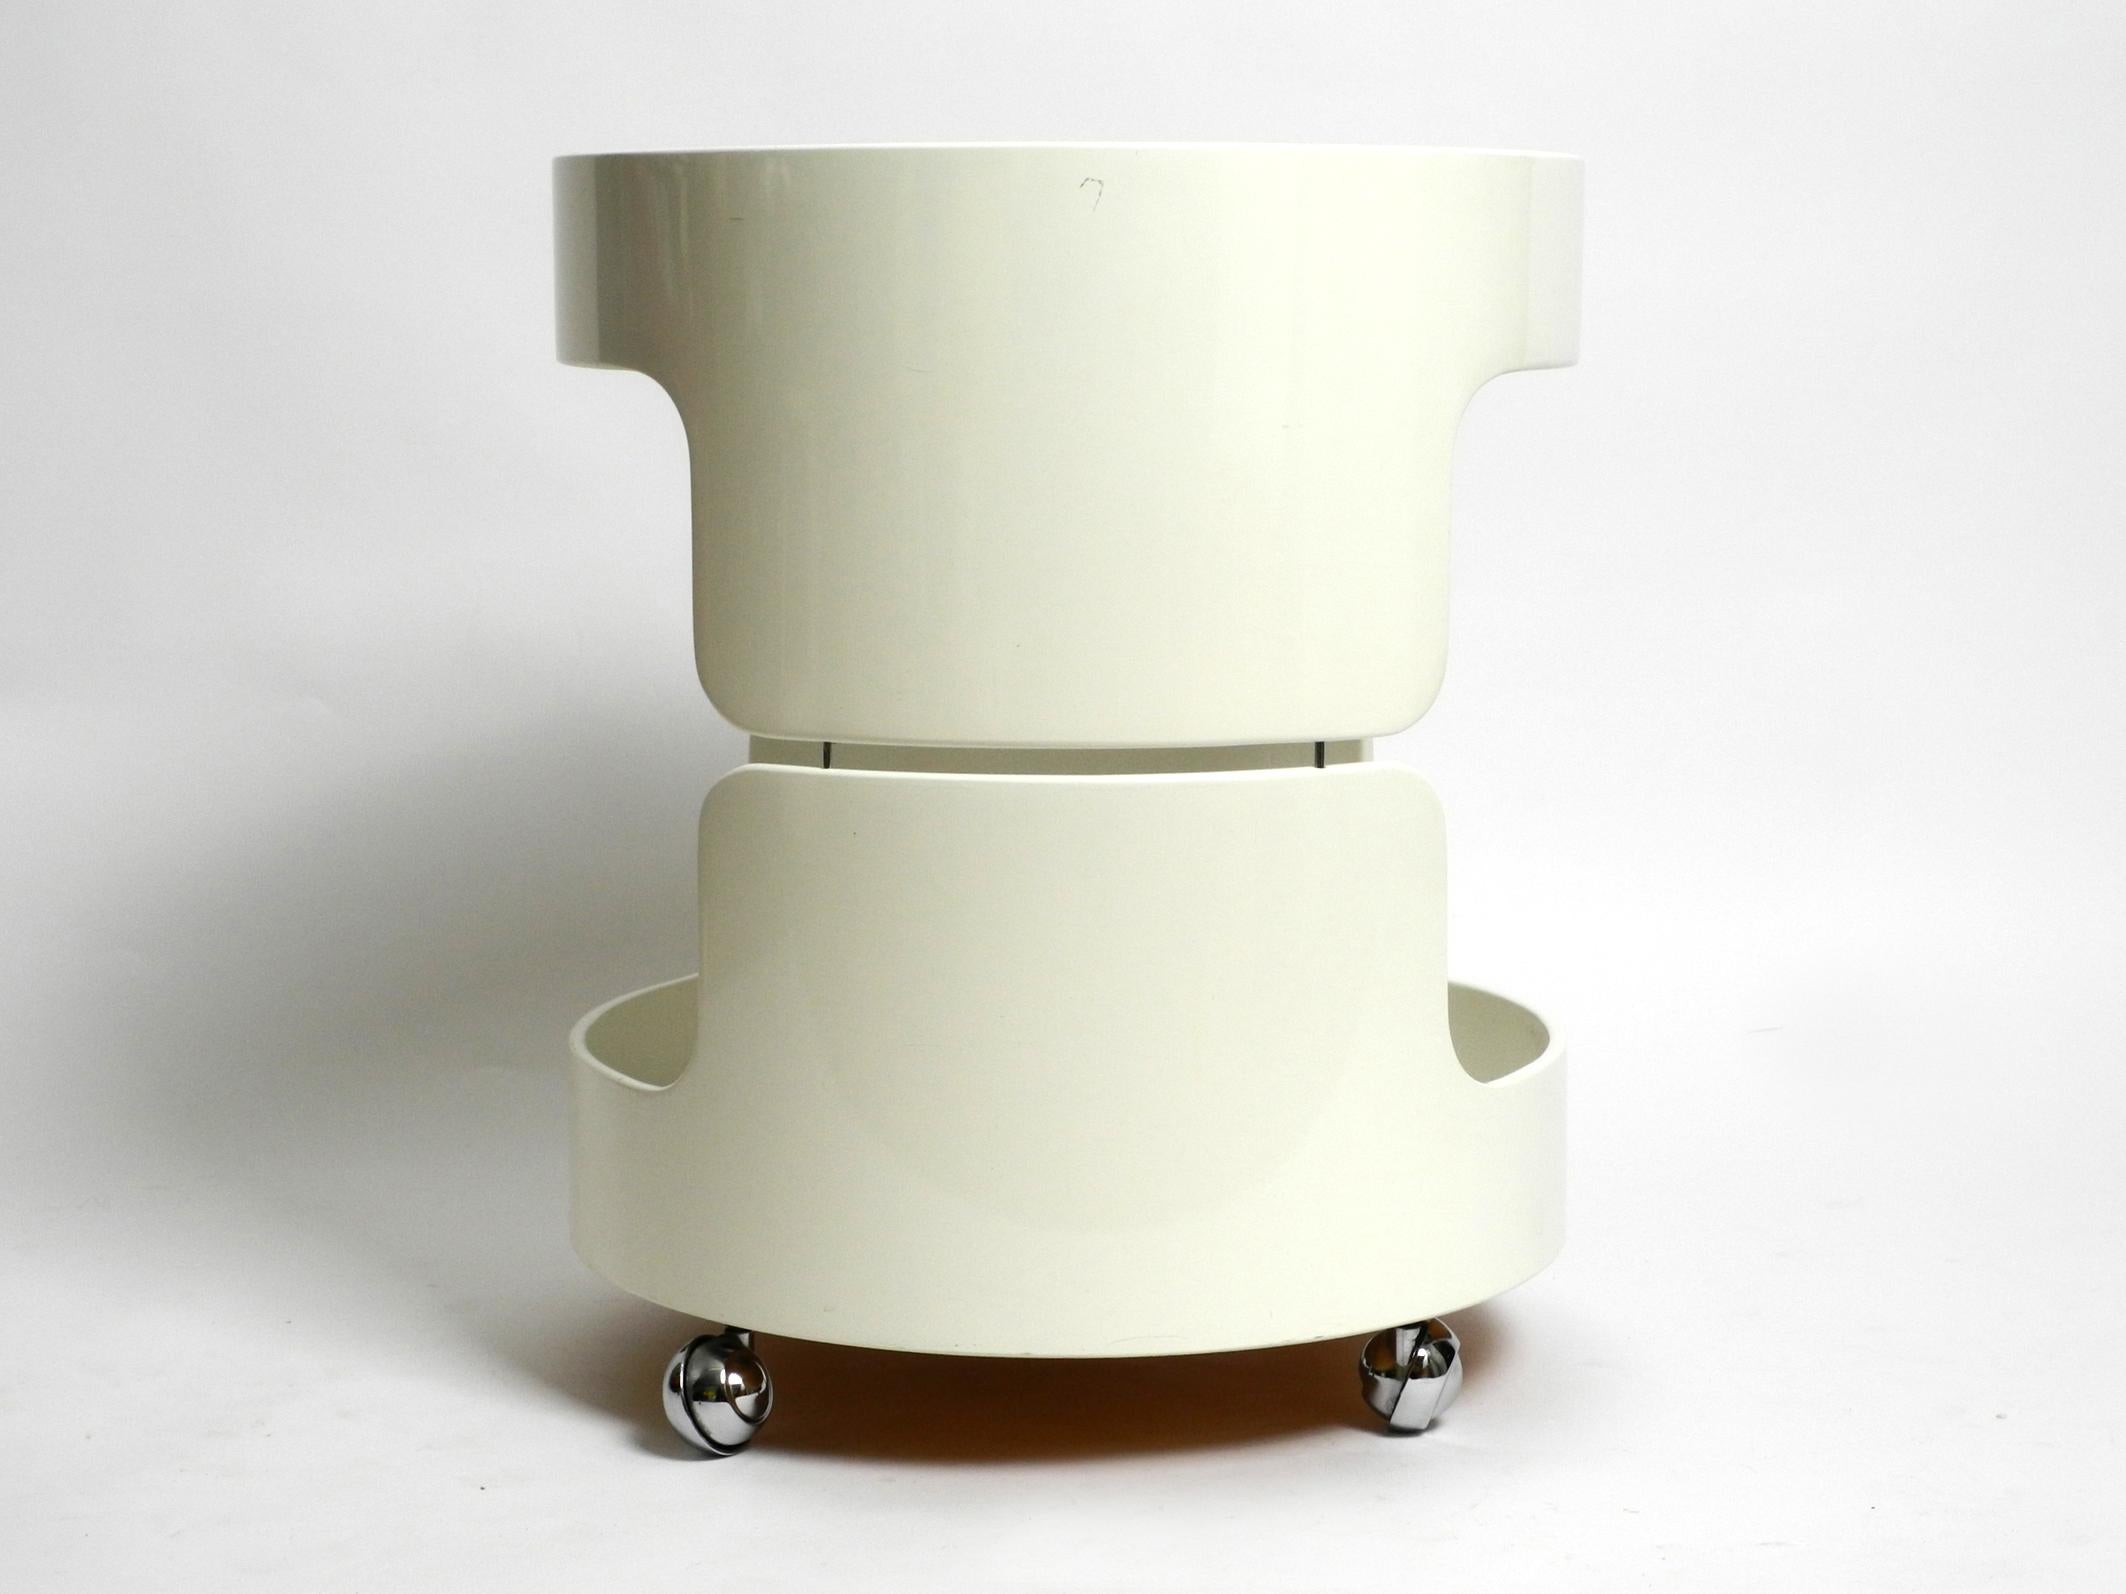 German Beautiful Rare 1960s Beige White Side or Bar Table with Wheels Space Age Design For Sale